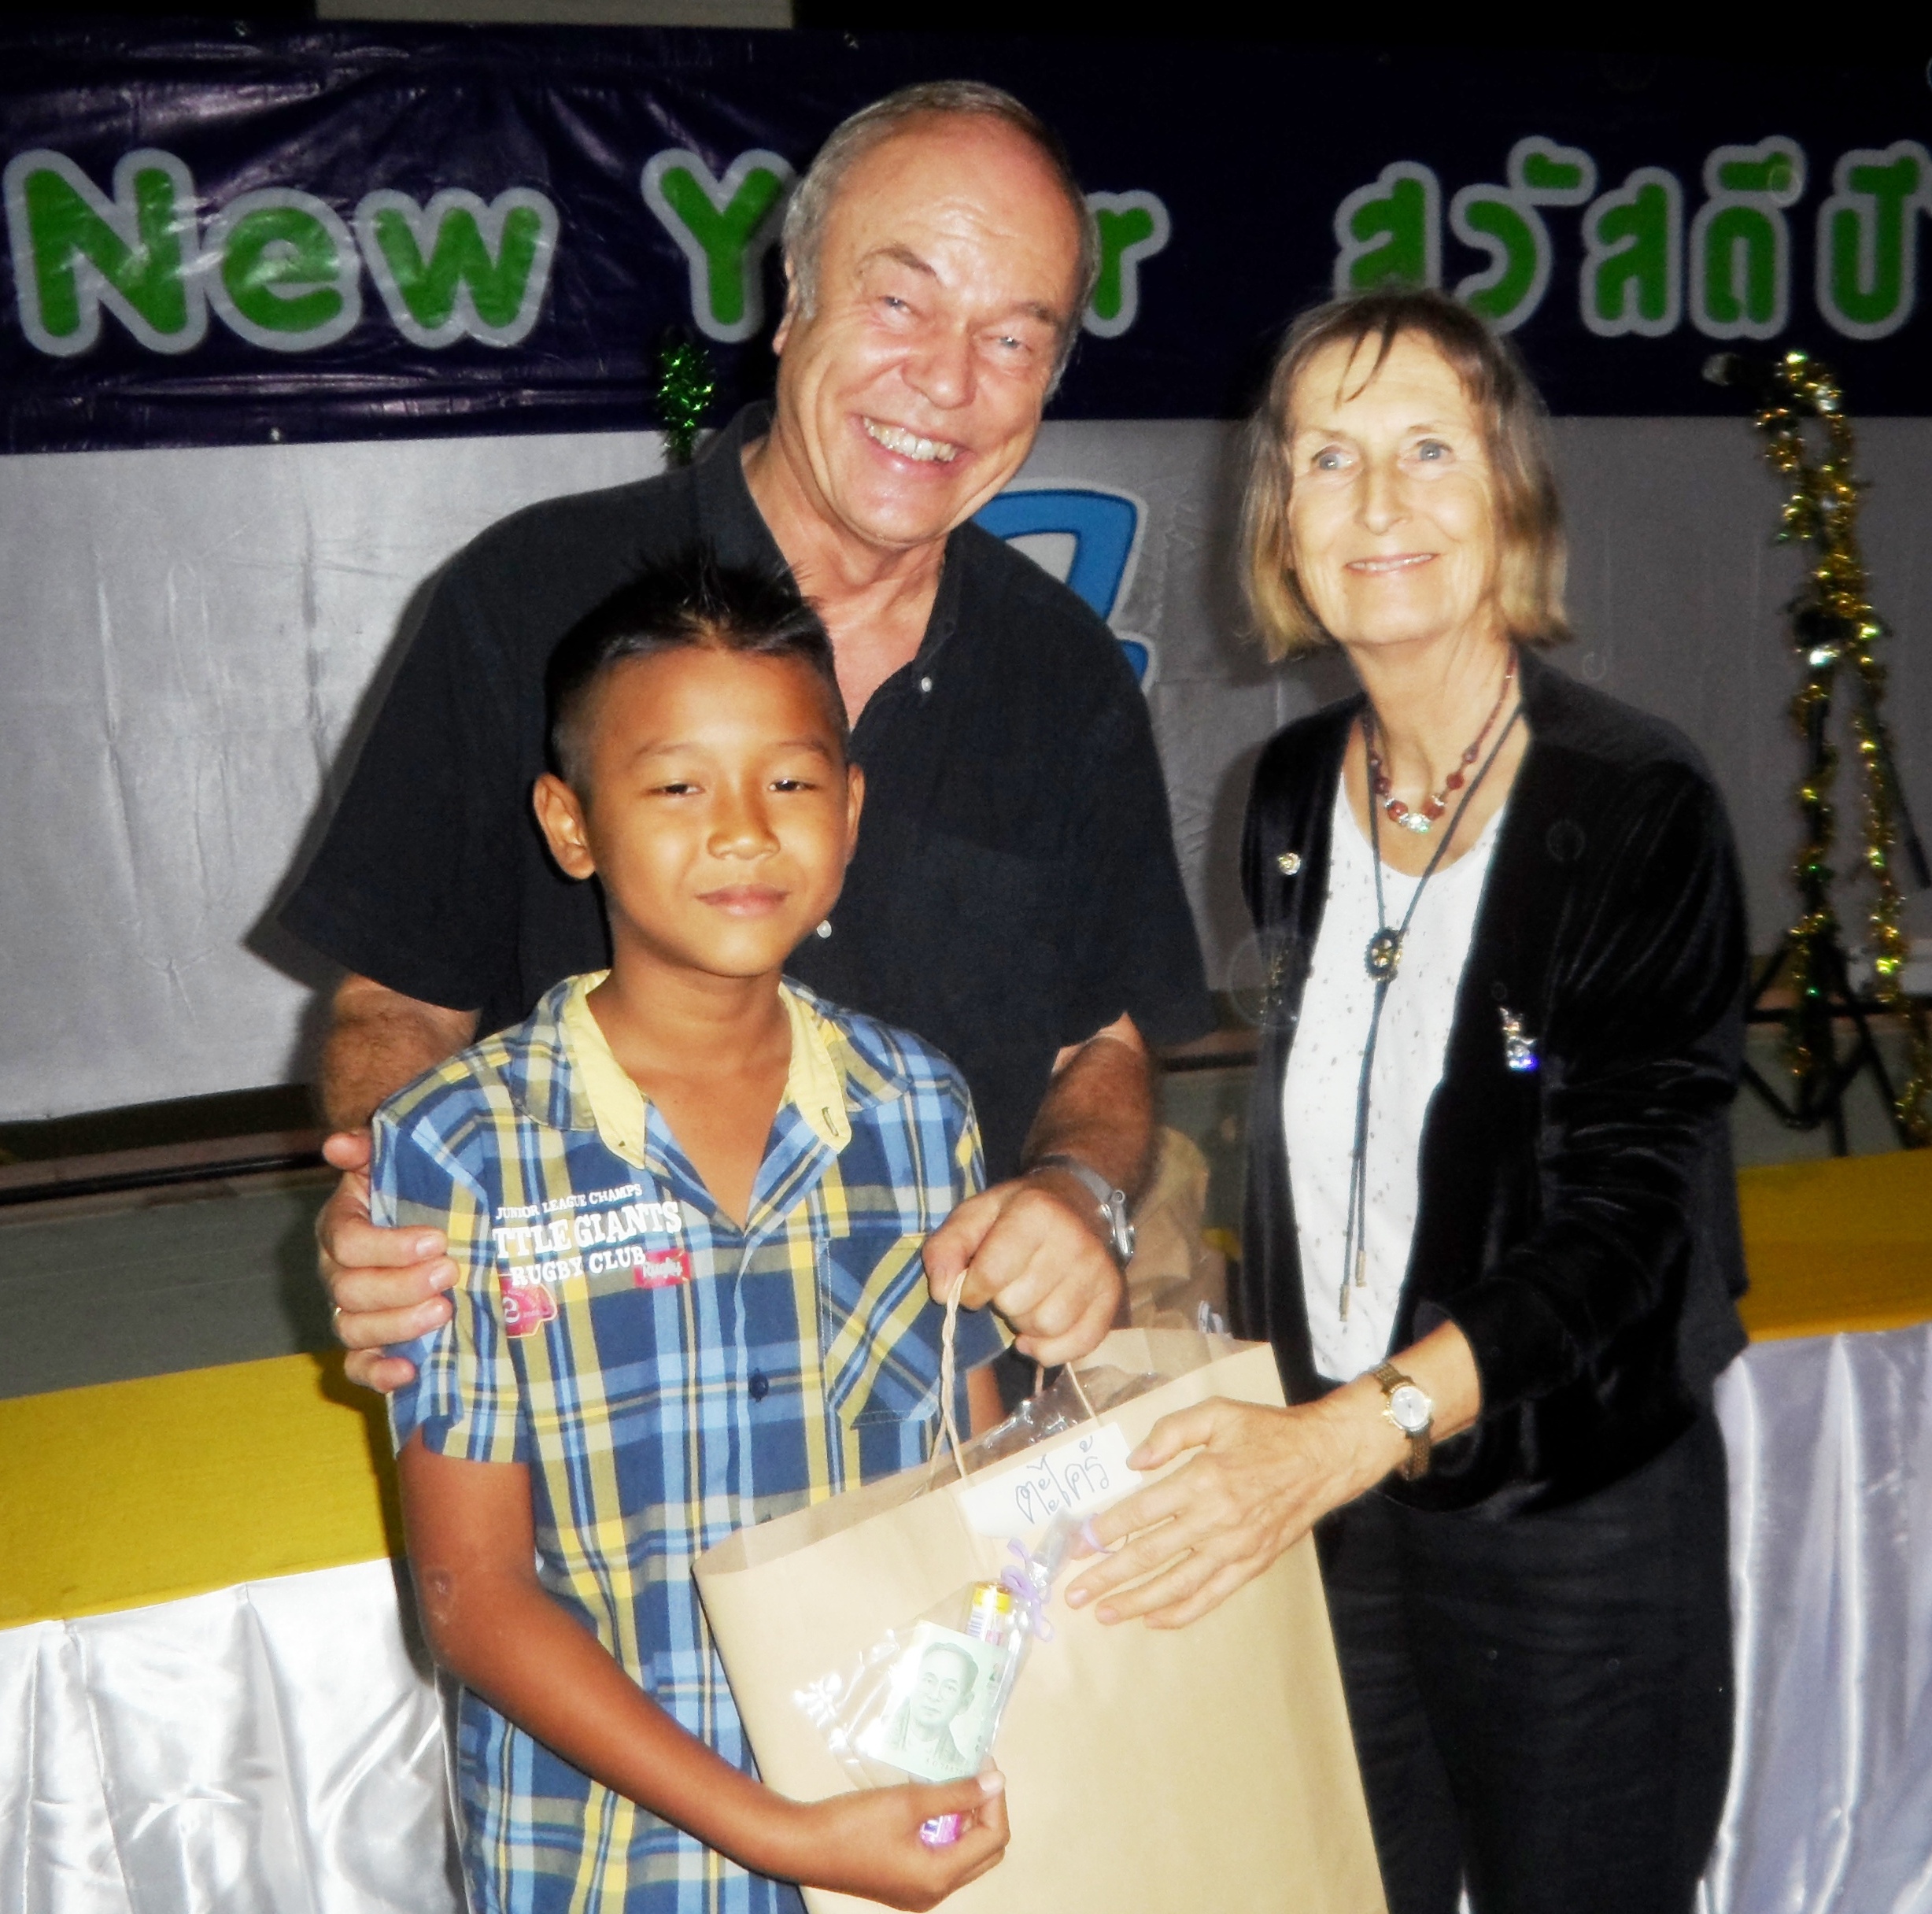 Pastor Liebe and Dr. Margret Deter give presents to the kids.